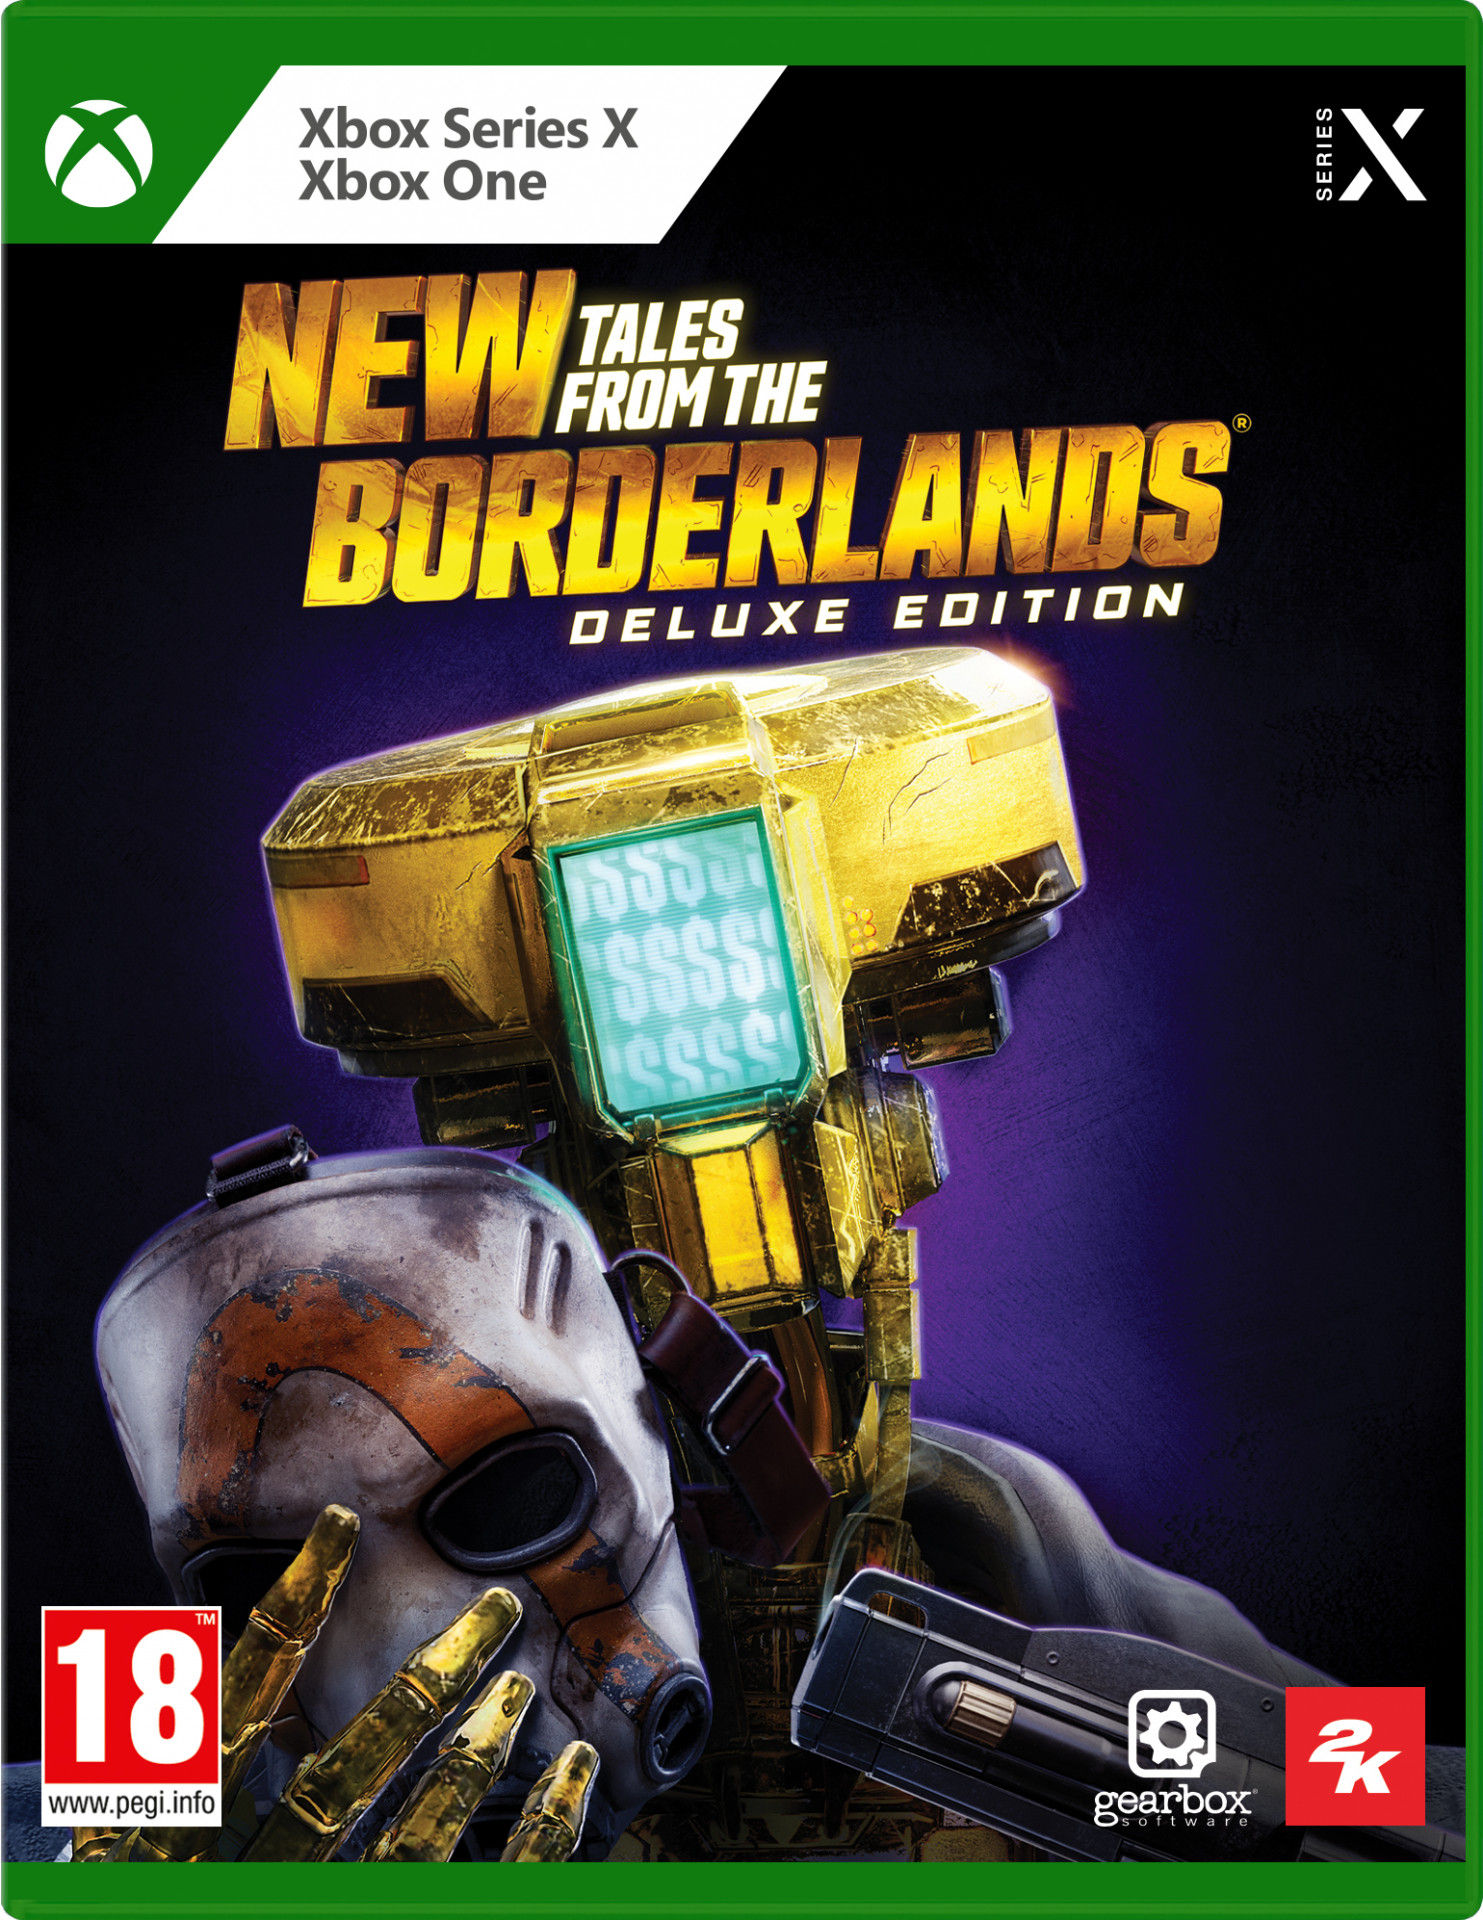 New Tales from the Borderlands Deluxe Edition Xbox One